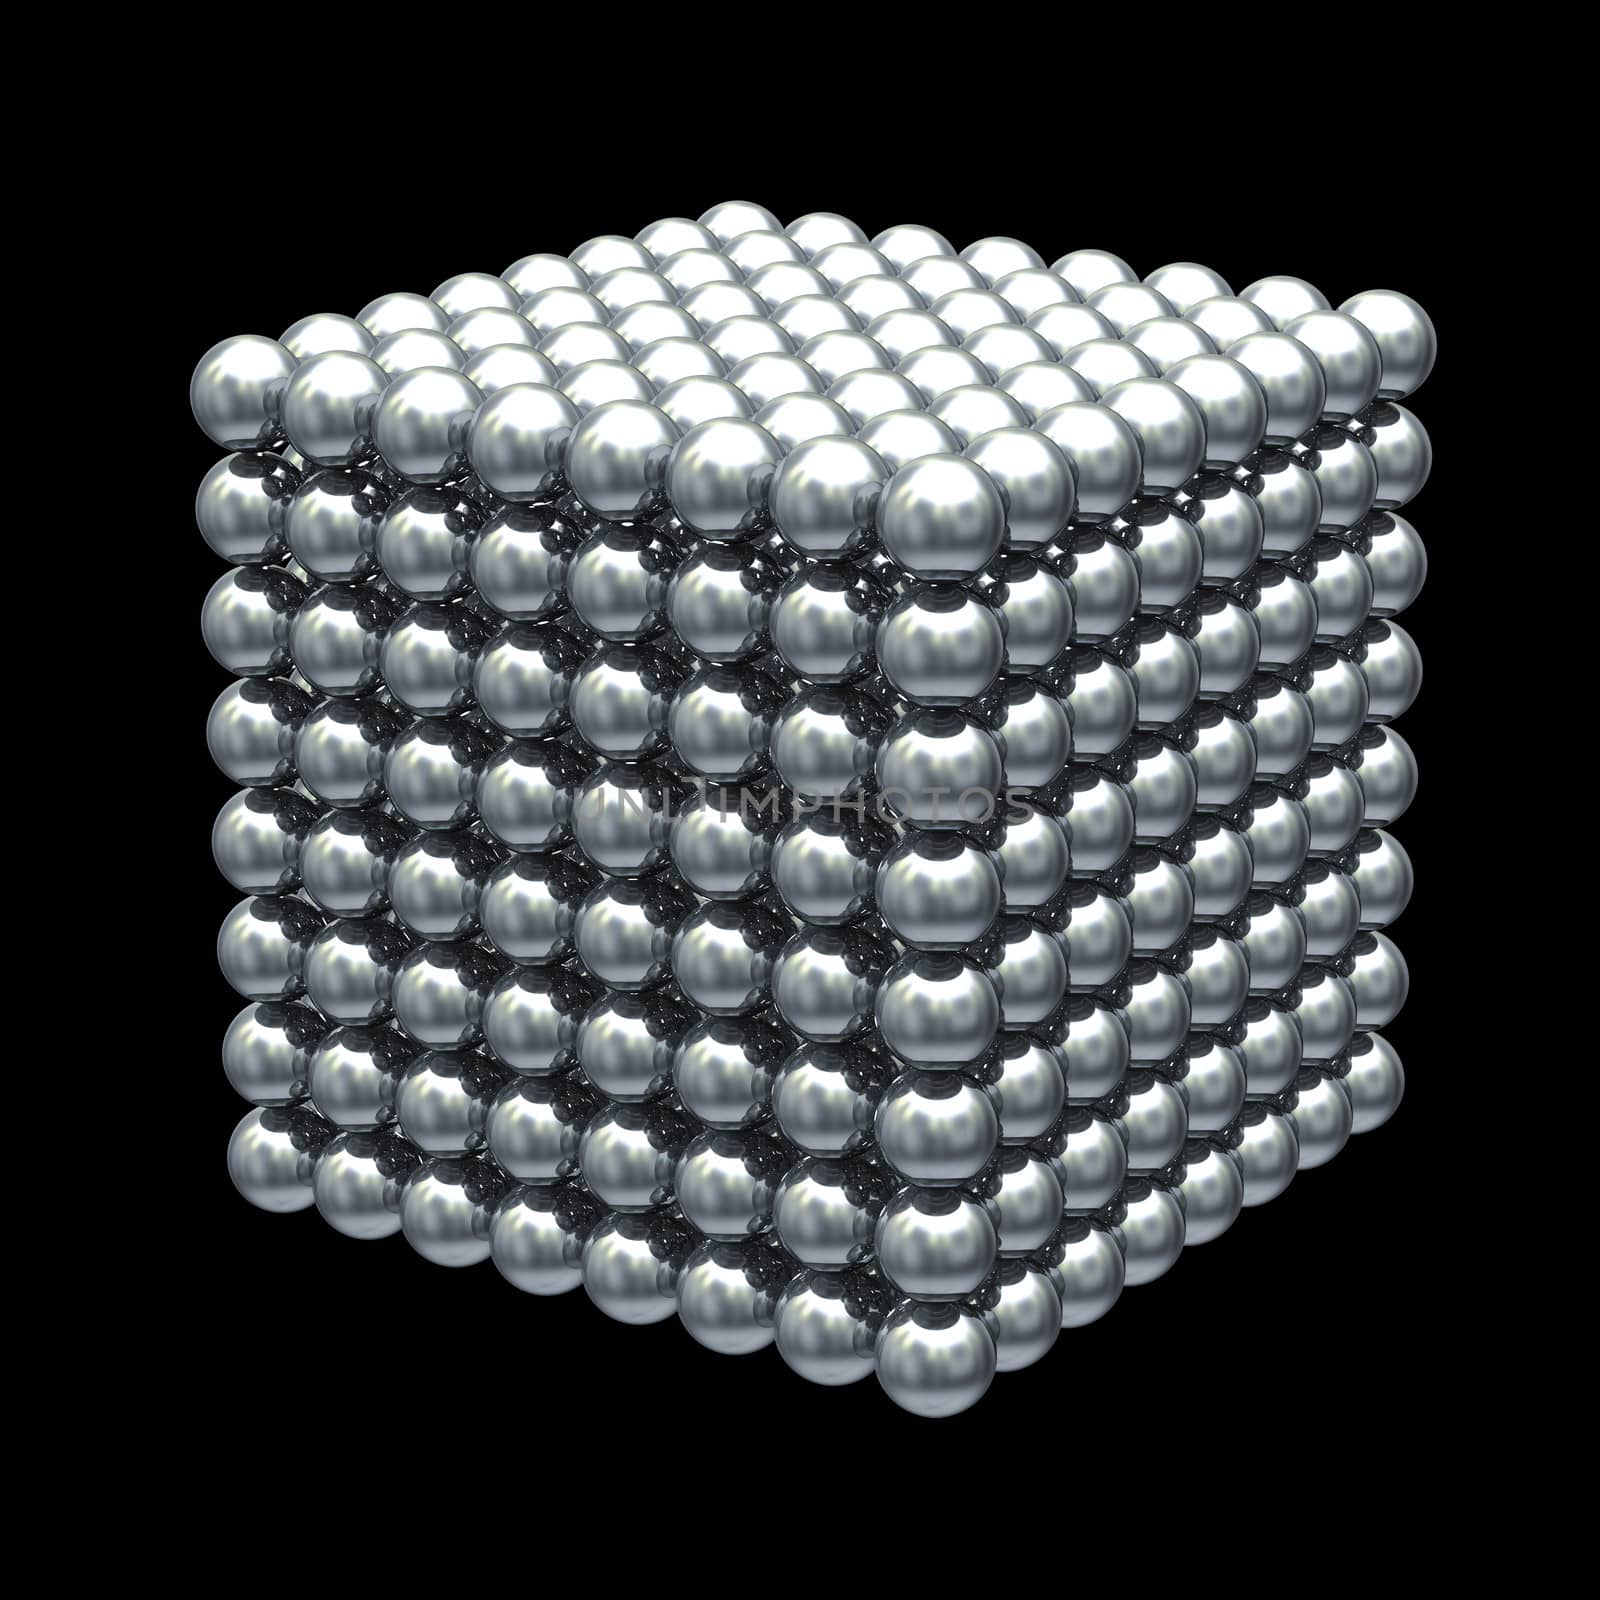 Magnetic metal balls cube - clipping path by 123dartist